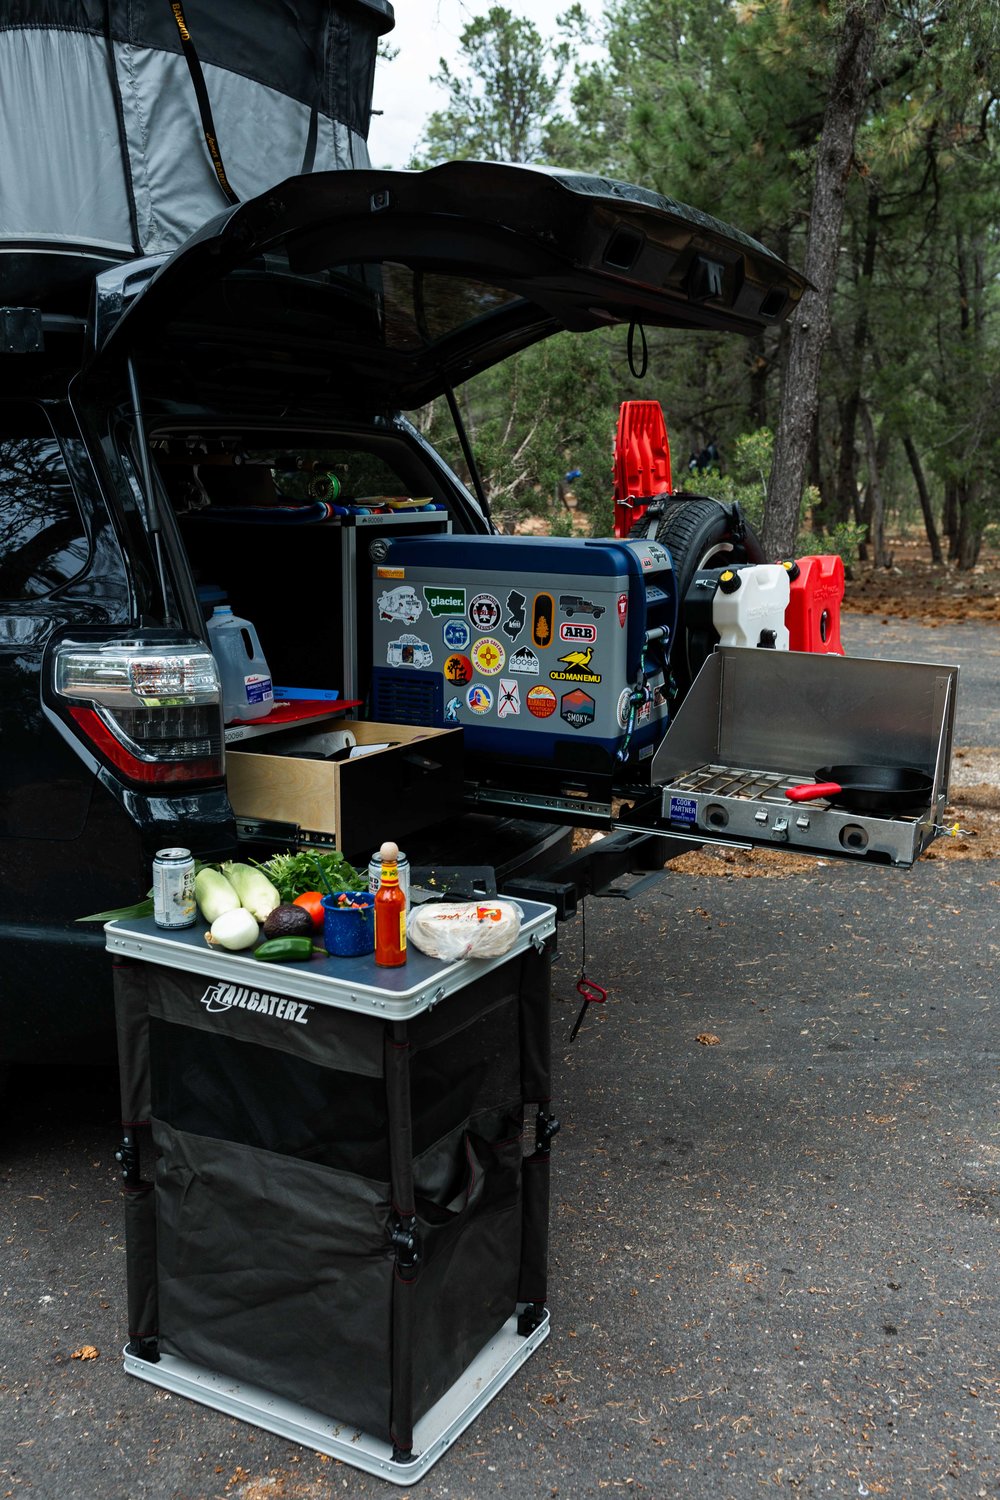 toyota 4 runner camping setup with kitchen in trunk